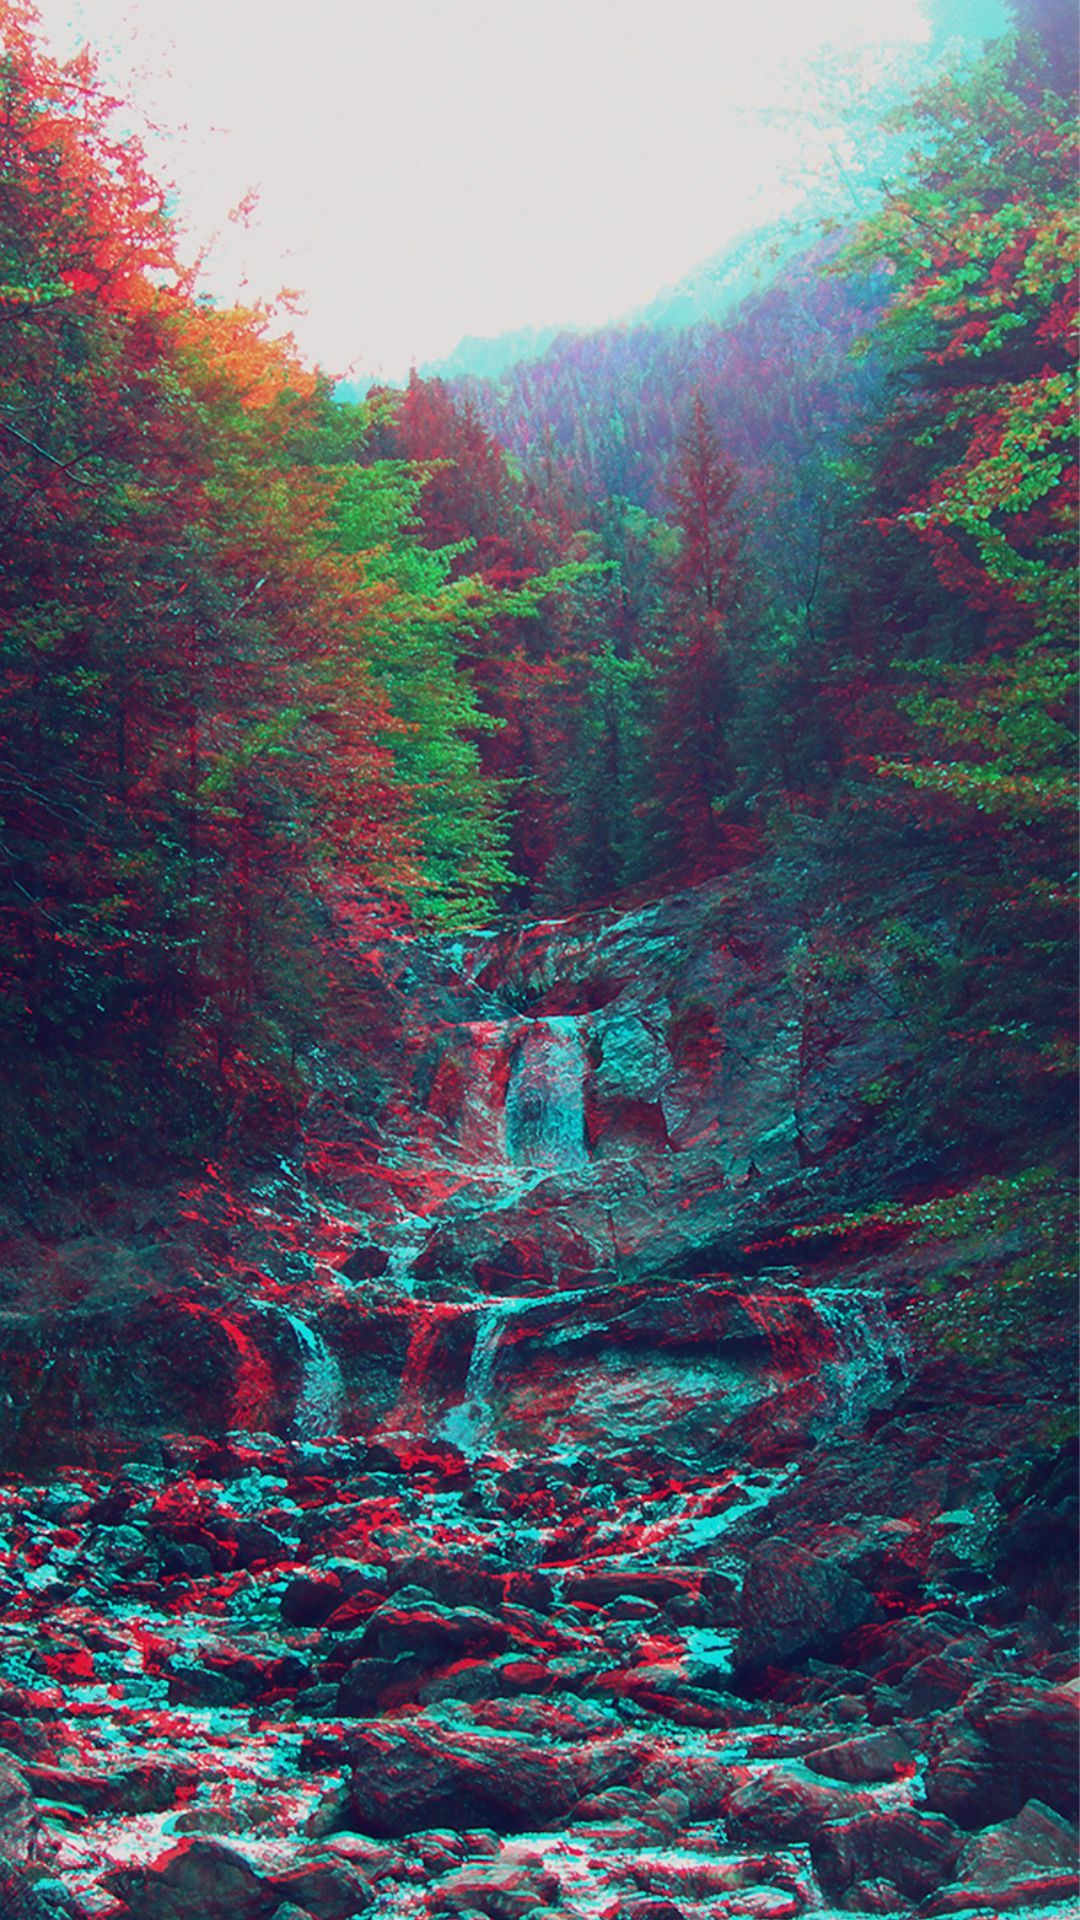 Anaglyph Mountain Green Nature Art iPhone 6 Wallpaper Download. iPhone Wallpaper, iPad wallpaper O. Trippy iphone wallpaper, Trippy wallpaper, Trippy aesthetic